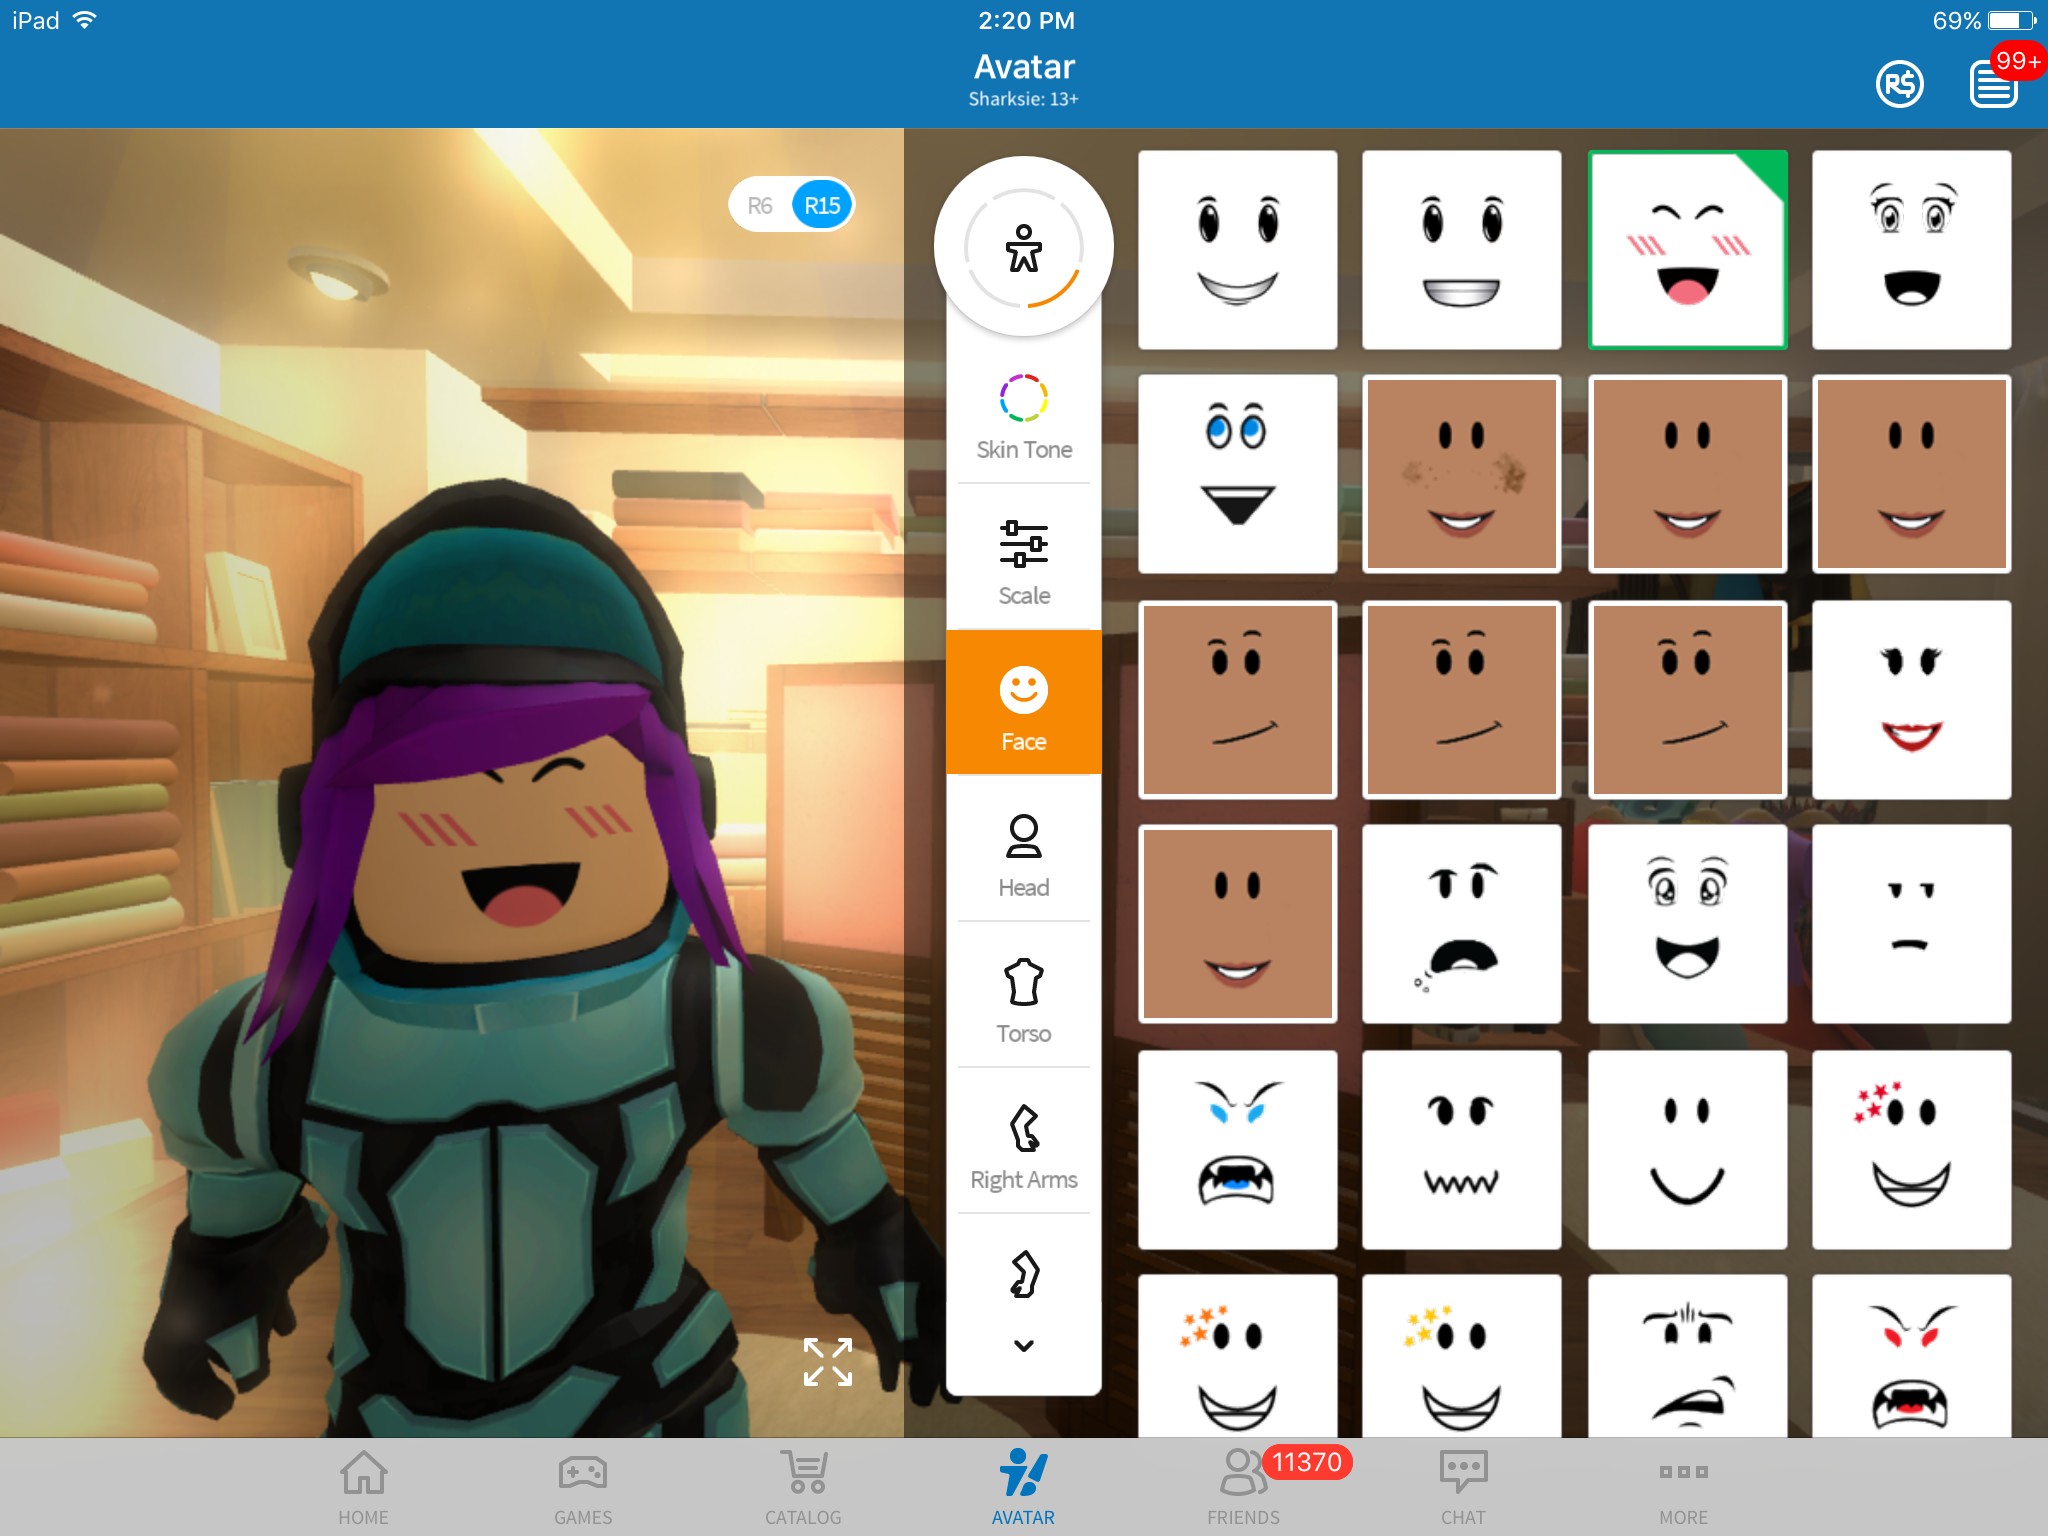 Update New Avatar Editor Web Tablets Previewing Animations